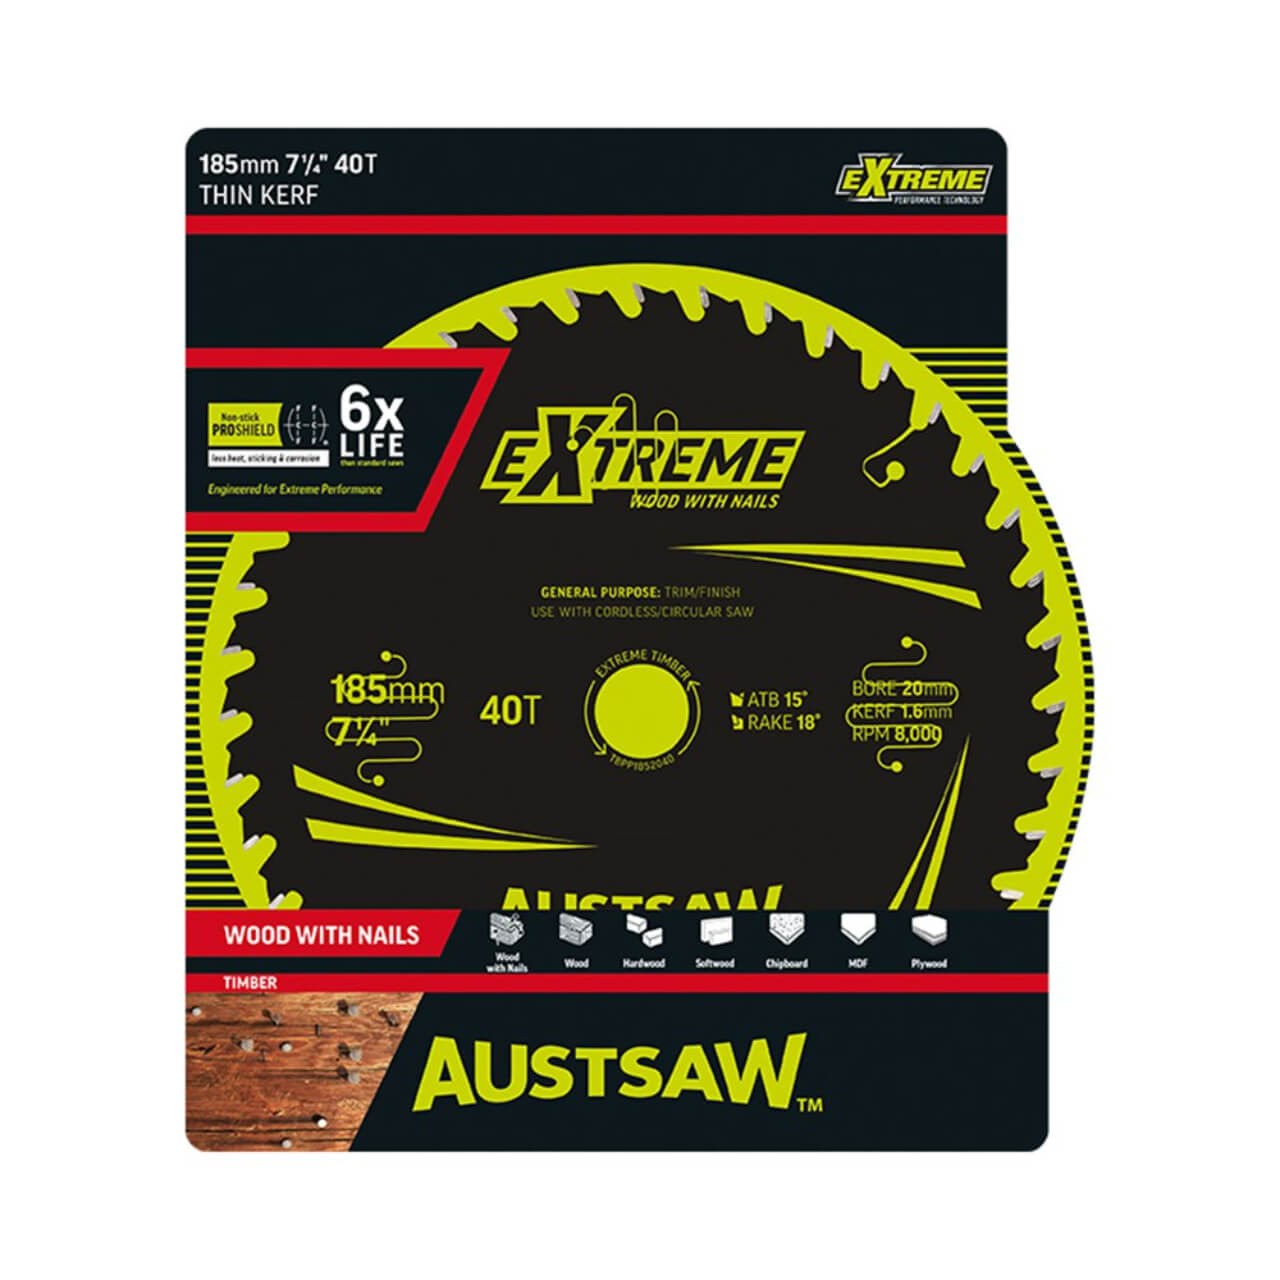 Austsaw Extreme: Wood with Nails Blade 185mm x 20/16 Bore x 40 T Thin Kerf